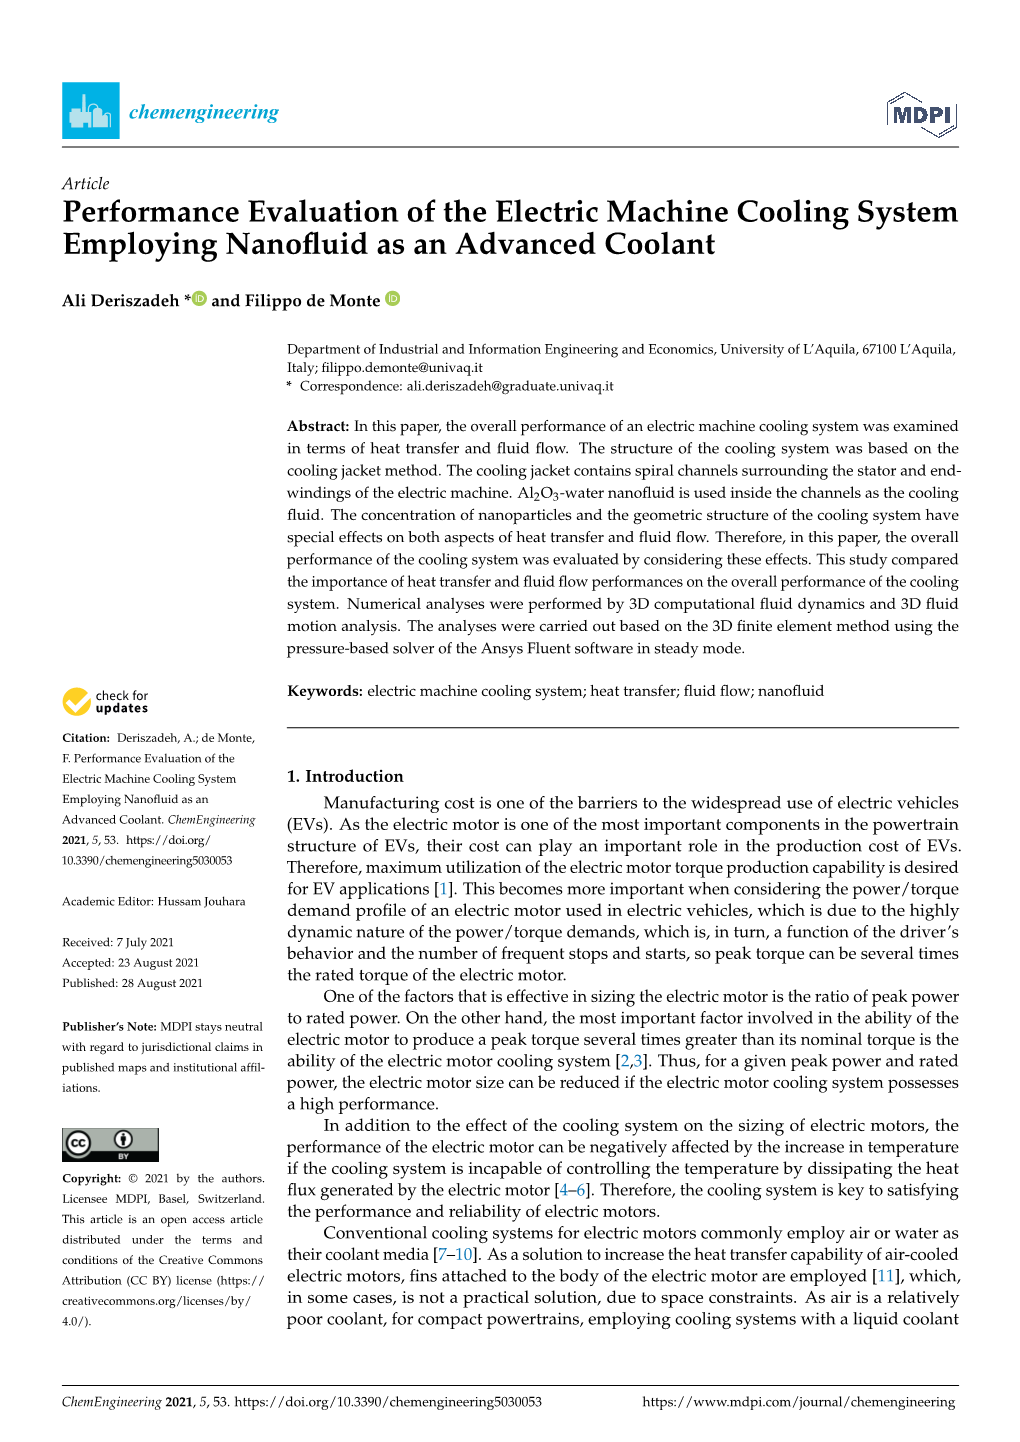 Performance Evaluation of the Electric Machine Cooling System Employing Nanoﬂuid As an Advanced Coolant